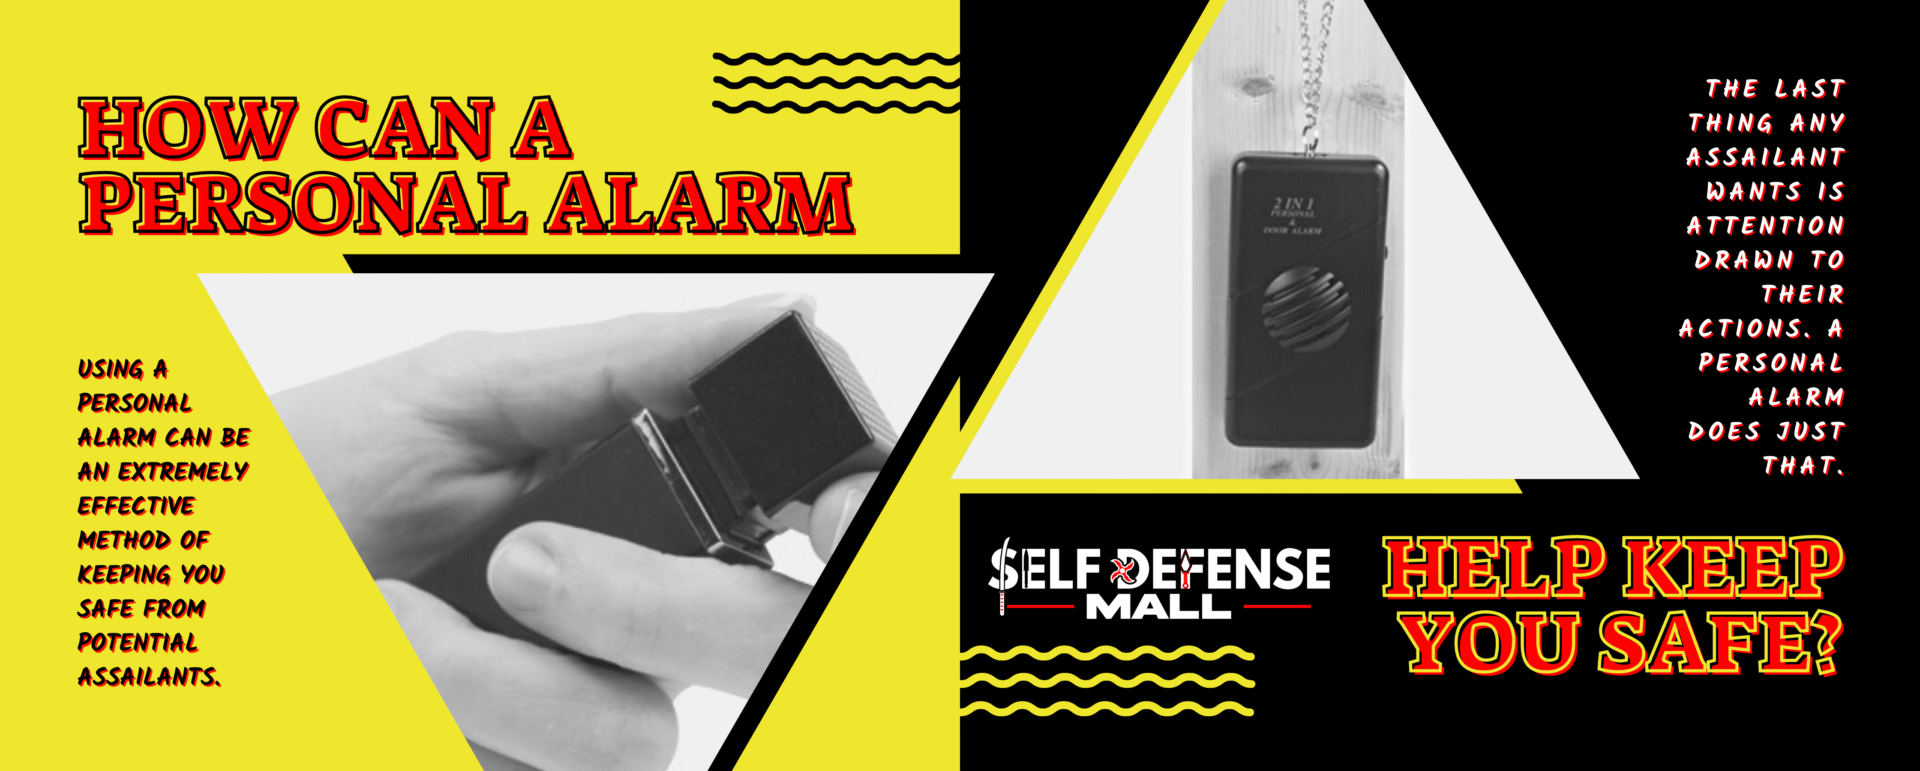 Personal Alarms | Keychain Personal Alarm | Personal Alarm For Safety | Safety Personal Alarm